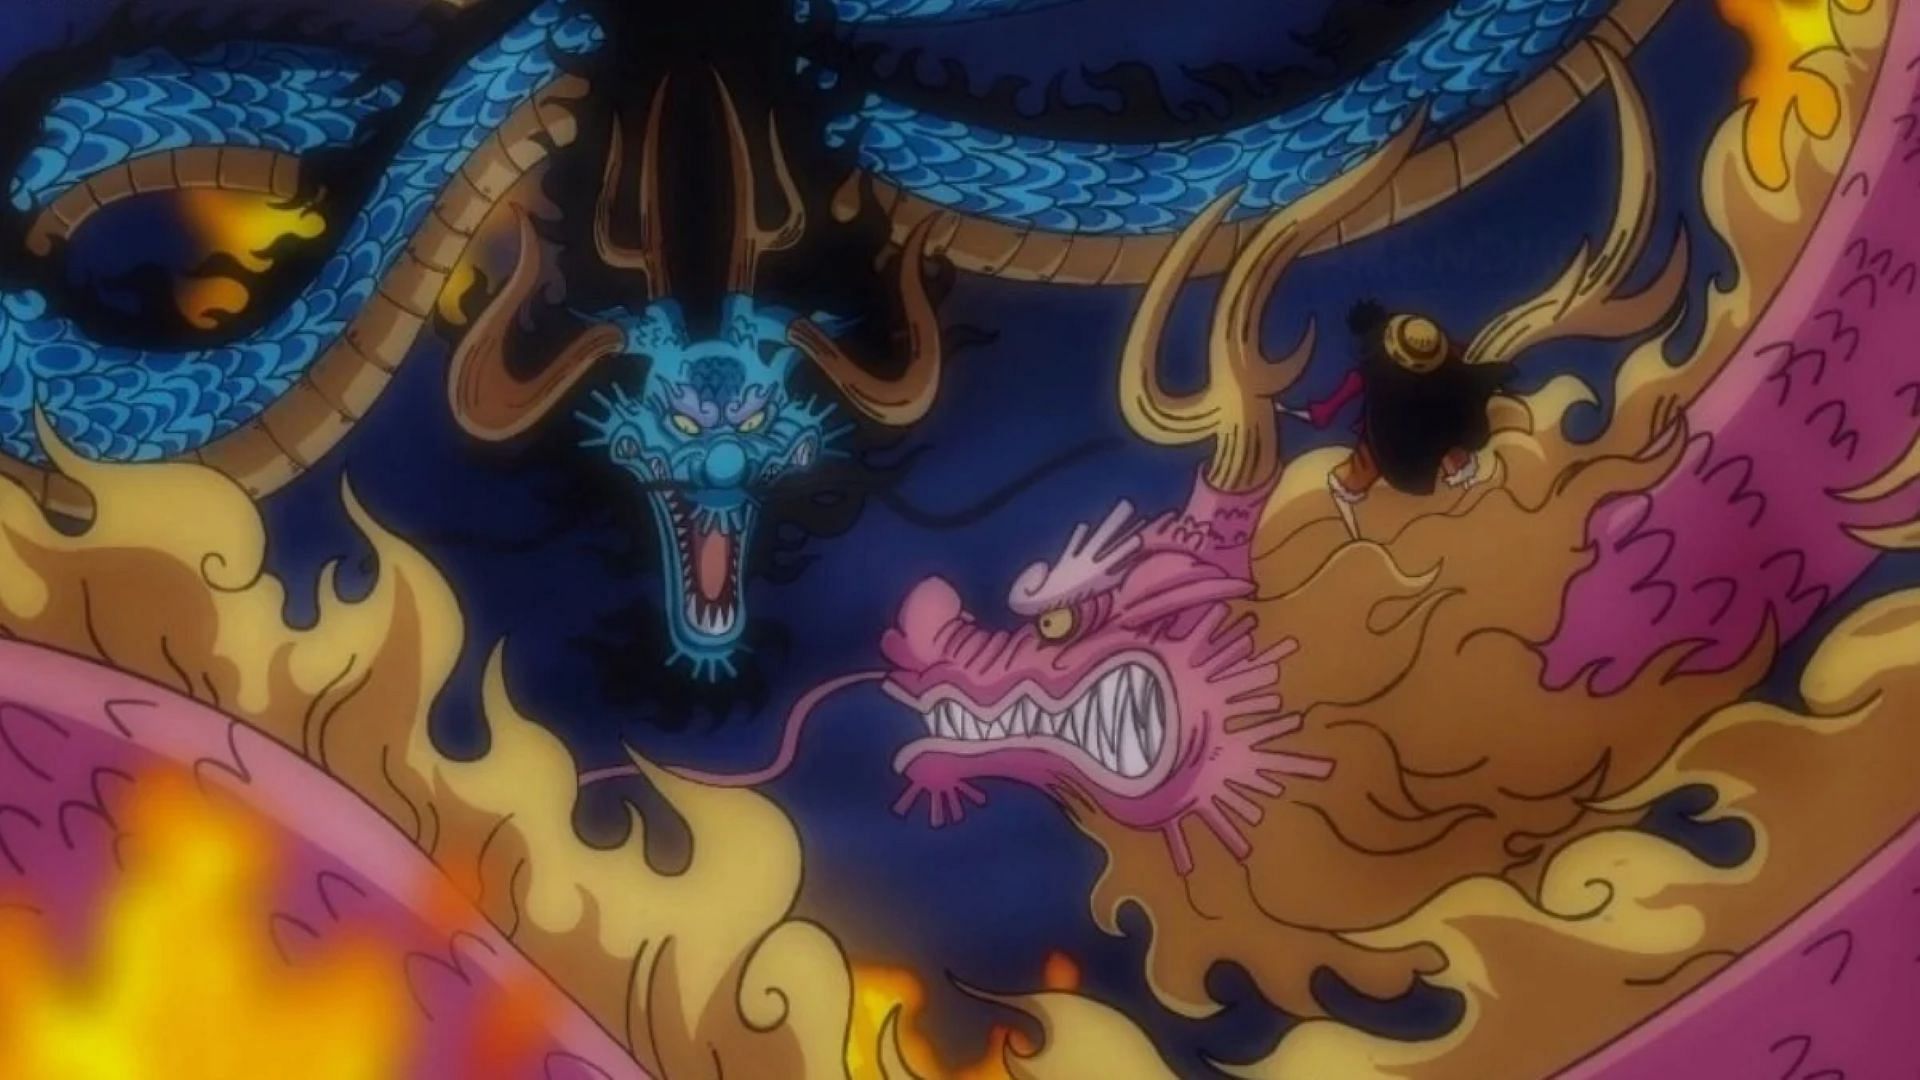 The Connection Between Momonosuke and Yonkou Kaido in One Piece